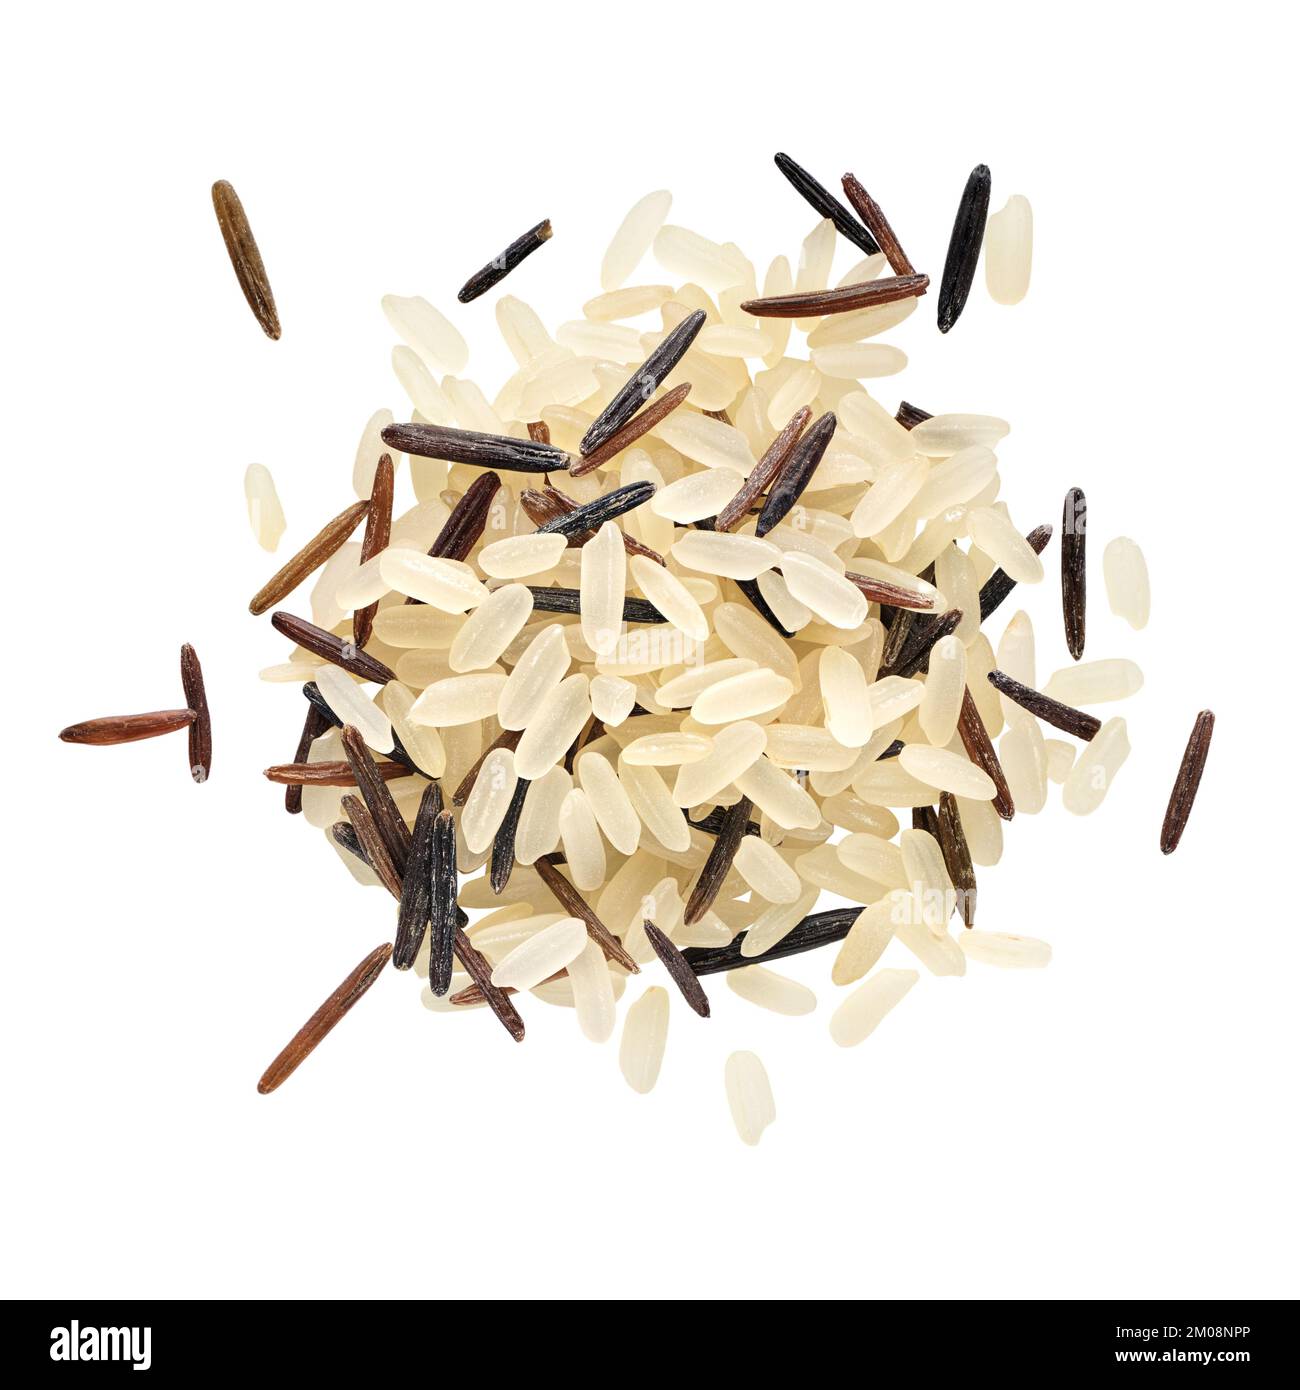 Food ingredients: mix of uncooked white and wild rice, small heap, isolated on white background Stock Photo